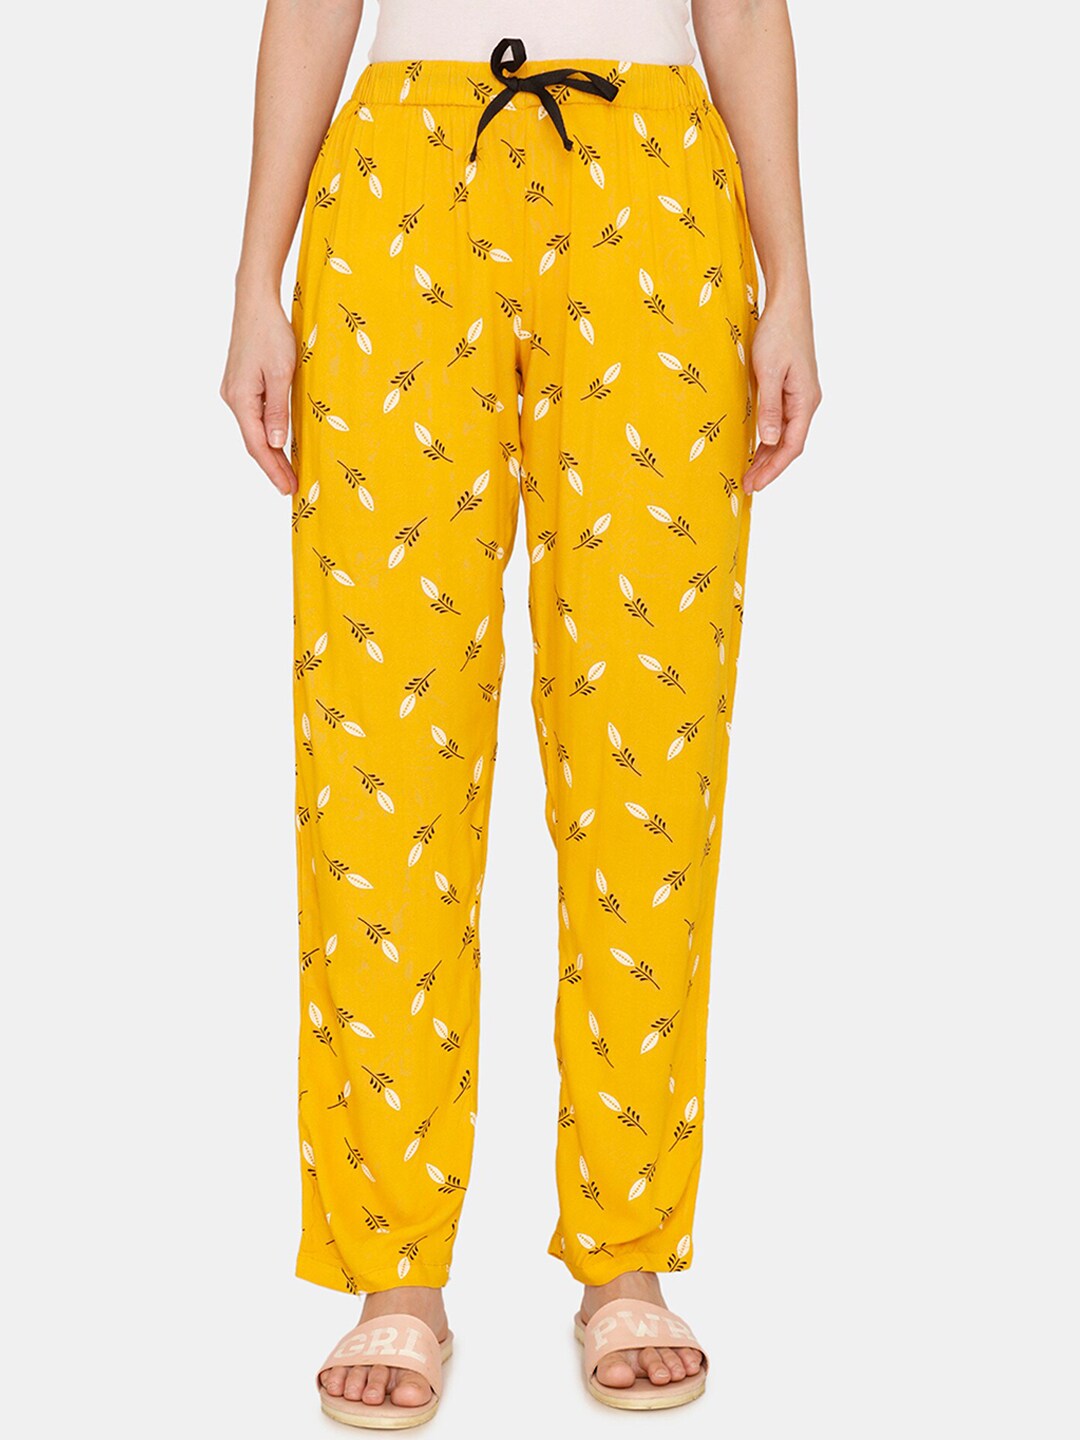 Coucou by Zivame Women Yellow Printed Pyjamas Price in India